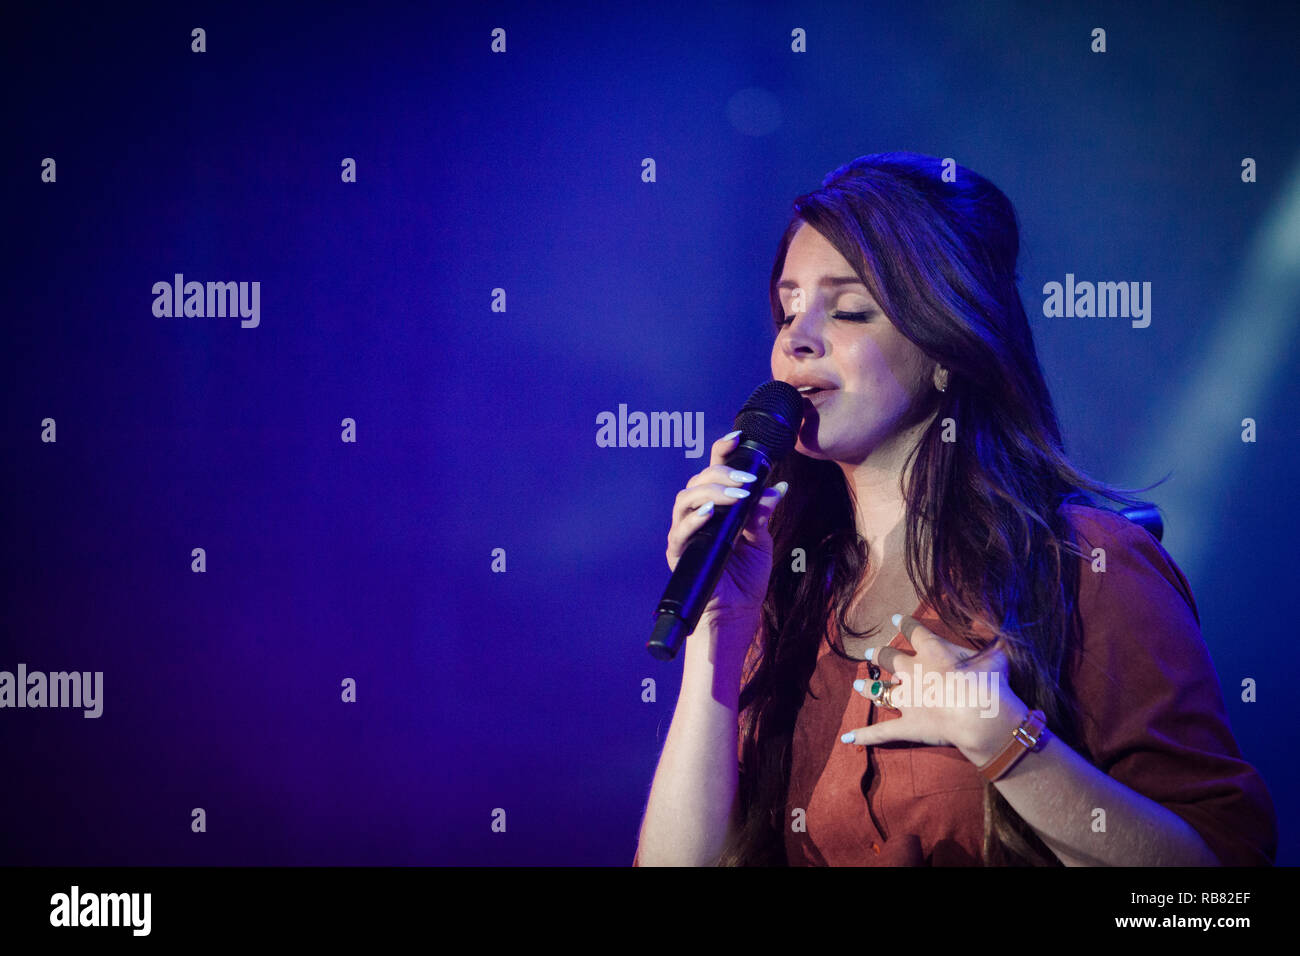 The American singer, songwriter and musician Lana Del Rey performs a live concert at the Danish music festival Northside 2014. Denmark, 13/06 2014. EXCLUDING DENMARK. Stock Photo